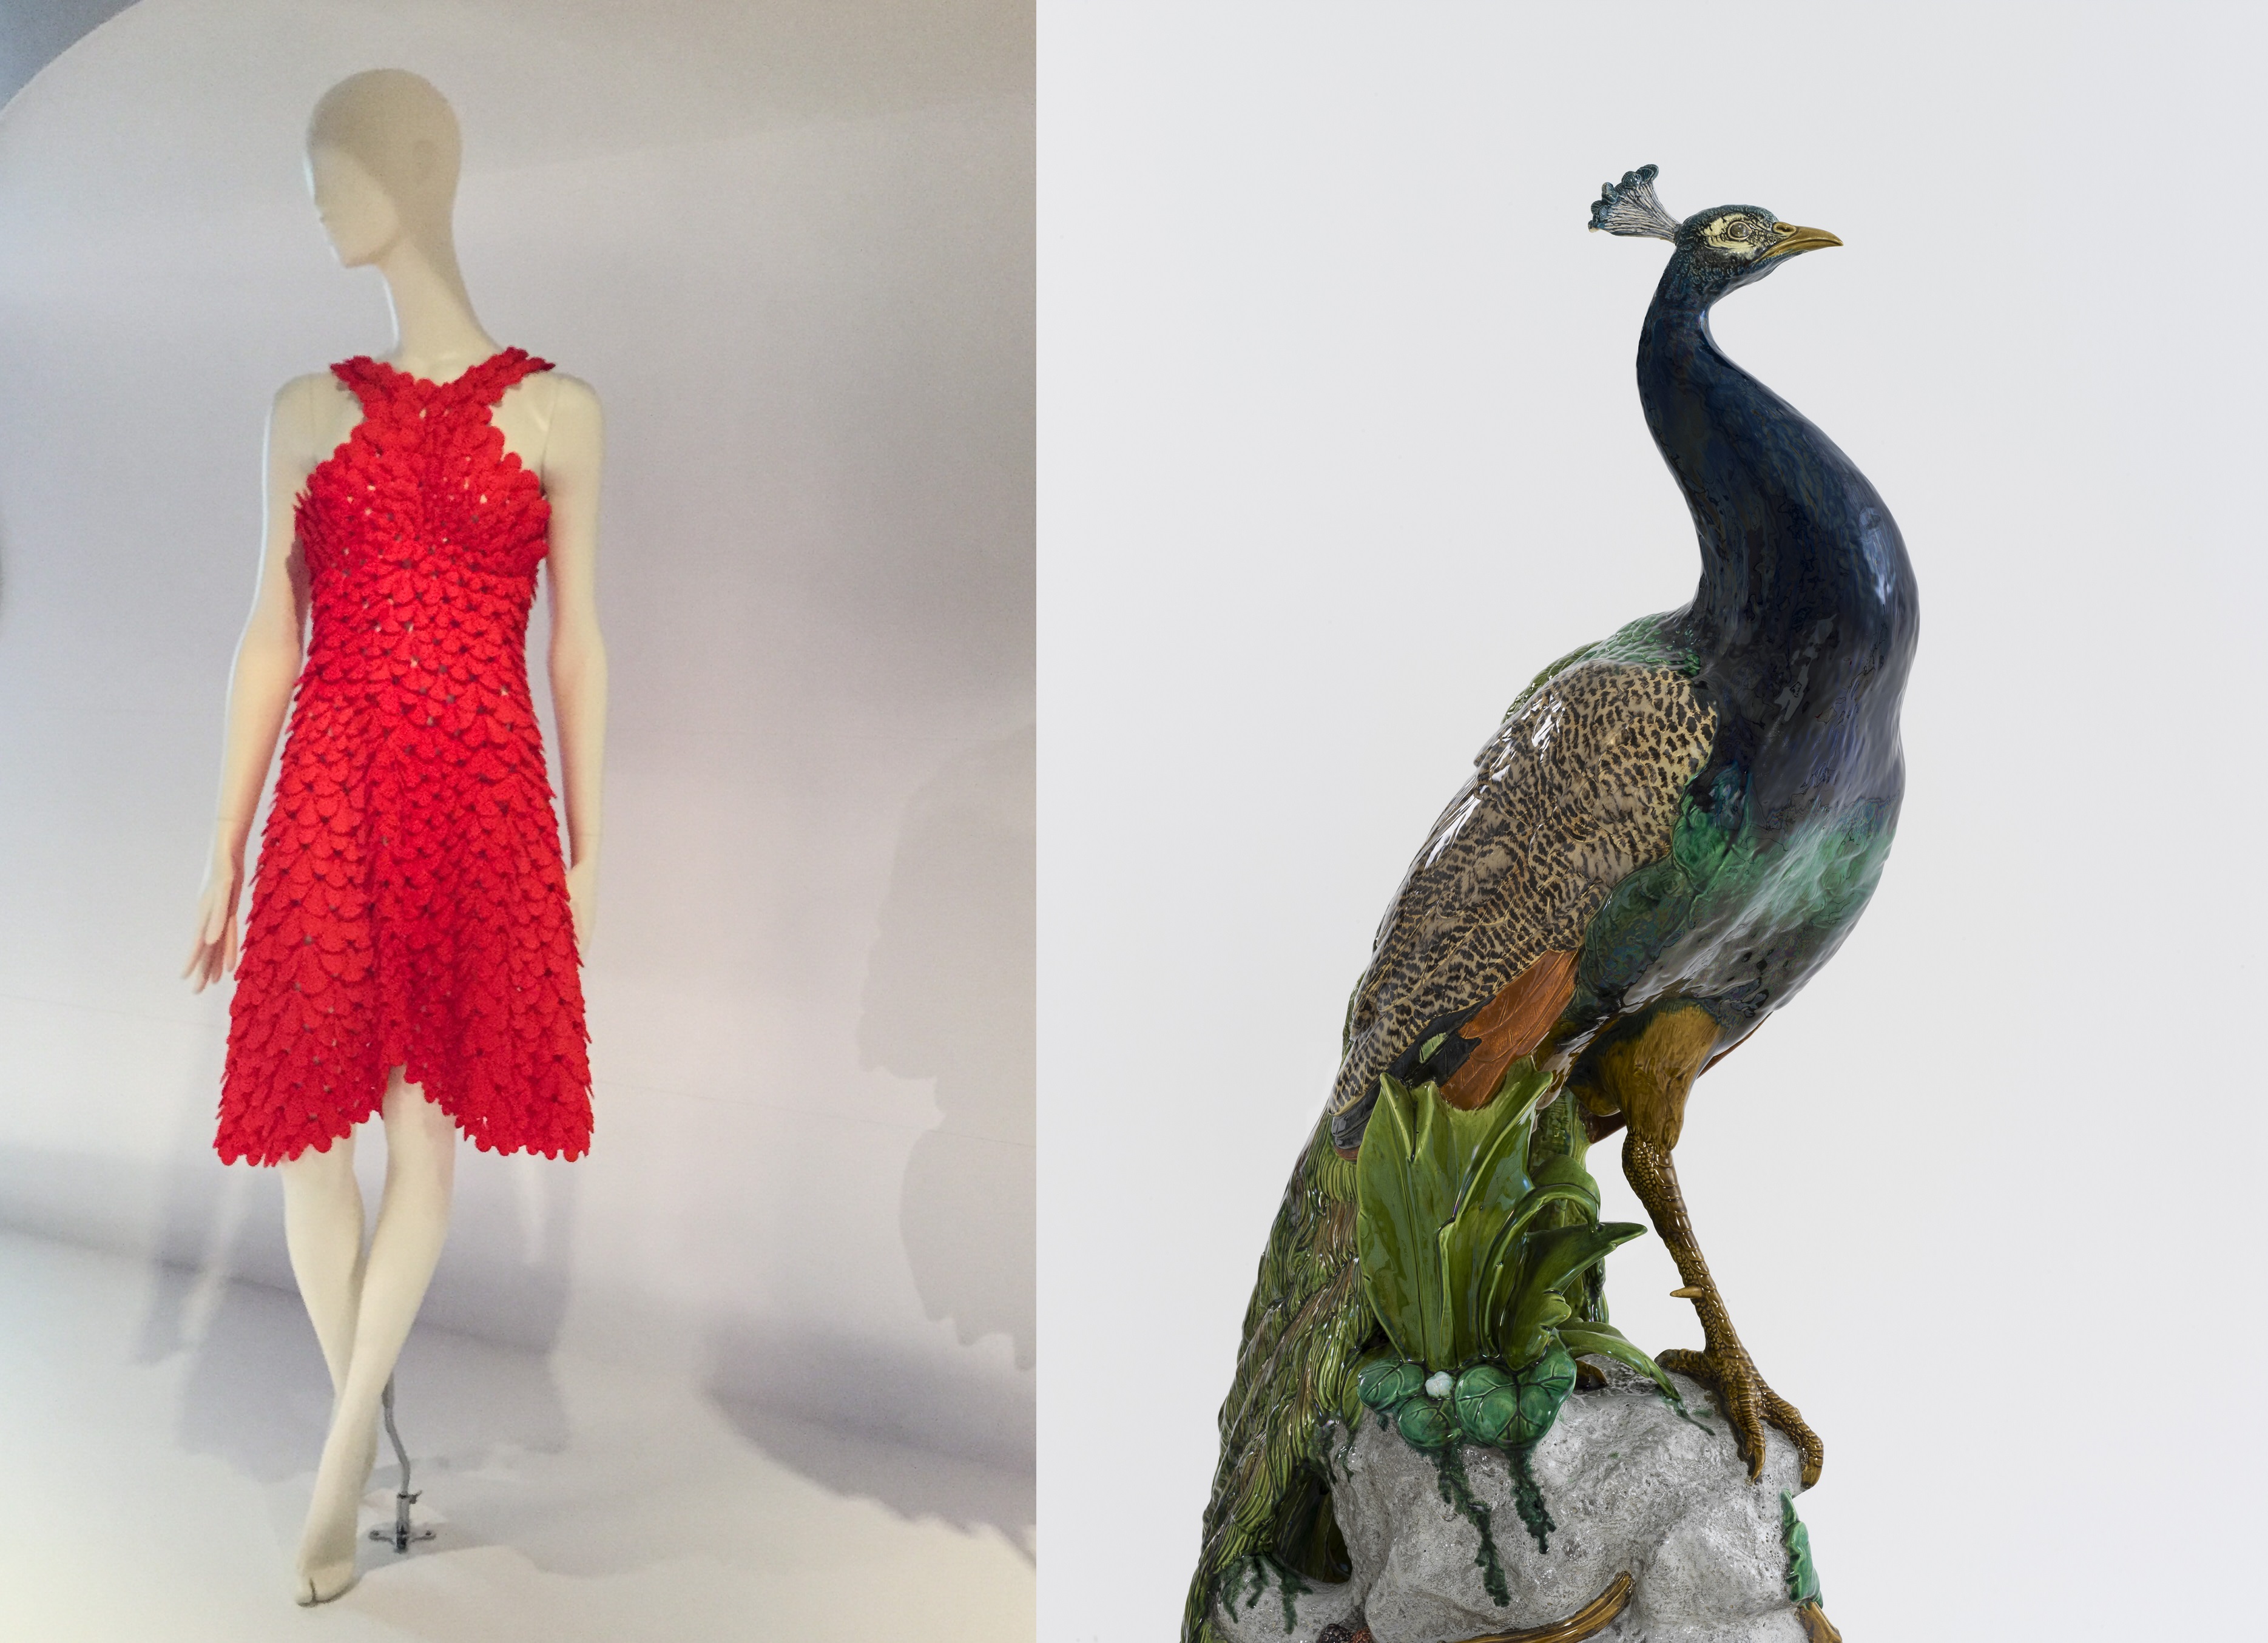 Two images side by side. Left: A red dress which appears to be made of red petals or scales, on a white mannequin. Right: Ceramic peacock sculpture featuring deep blue and green glazes.